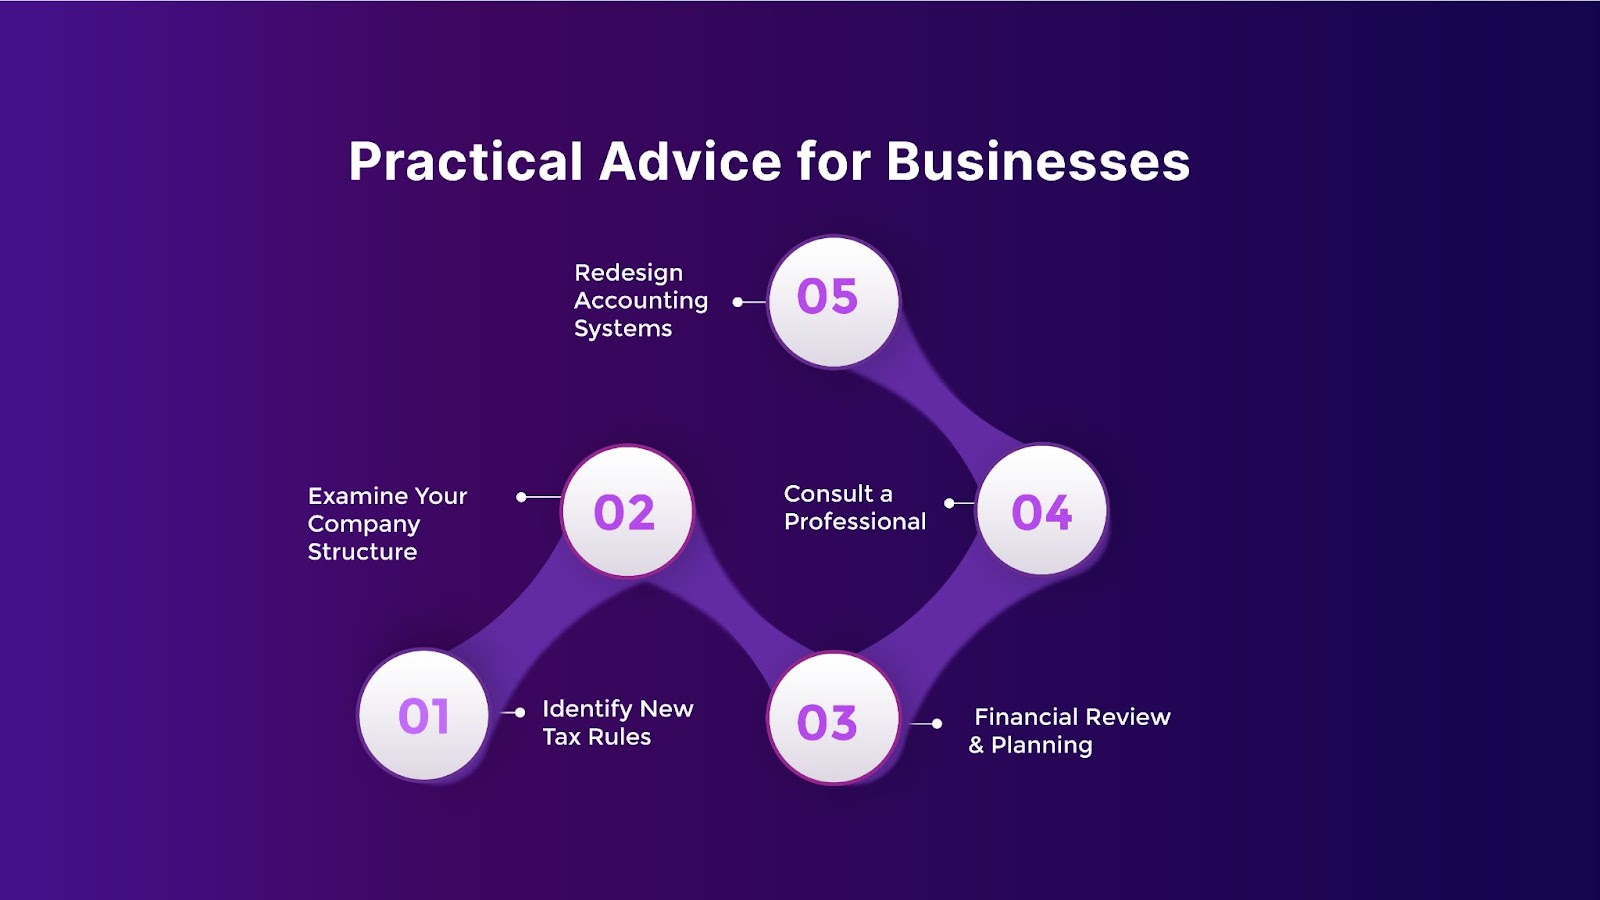 Practical Advice for Businesses